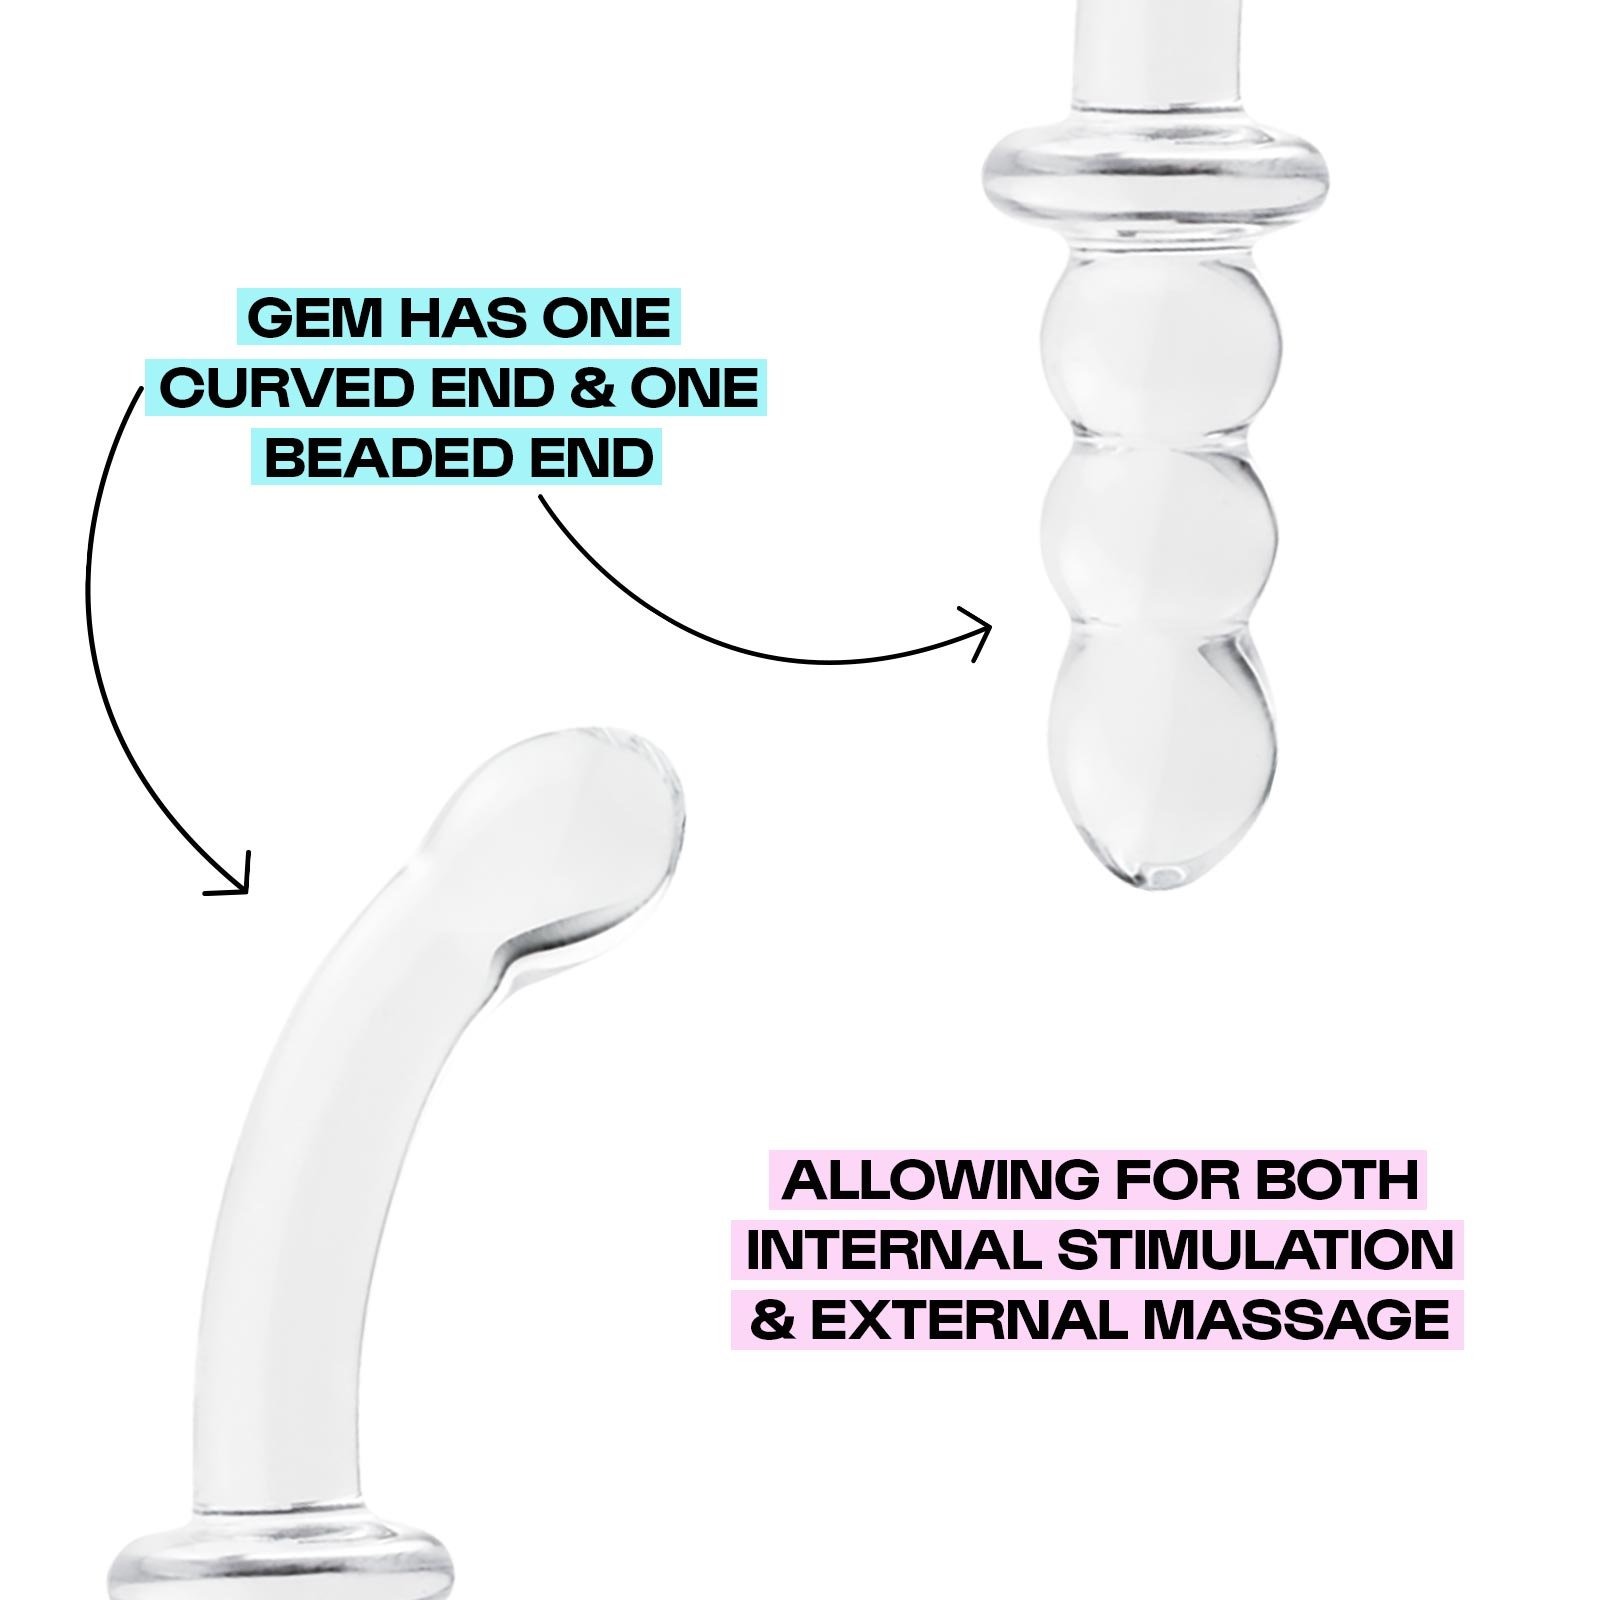 gem has one curved end and one beaded end allowing for both internal stimulation and external massage